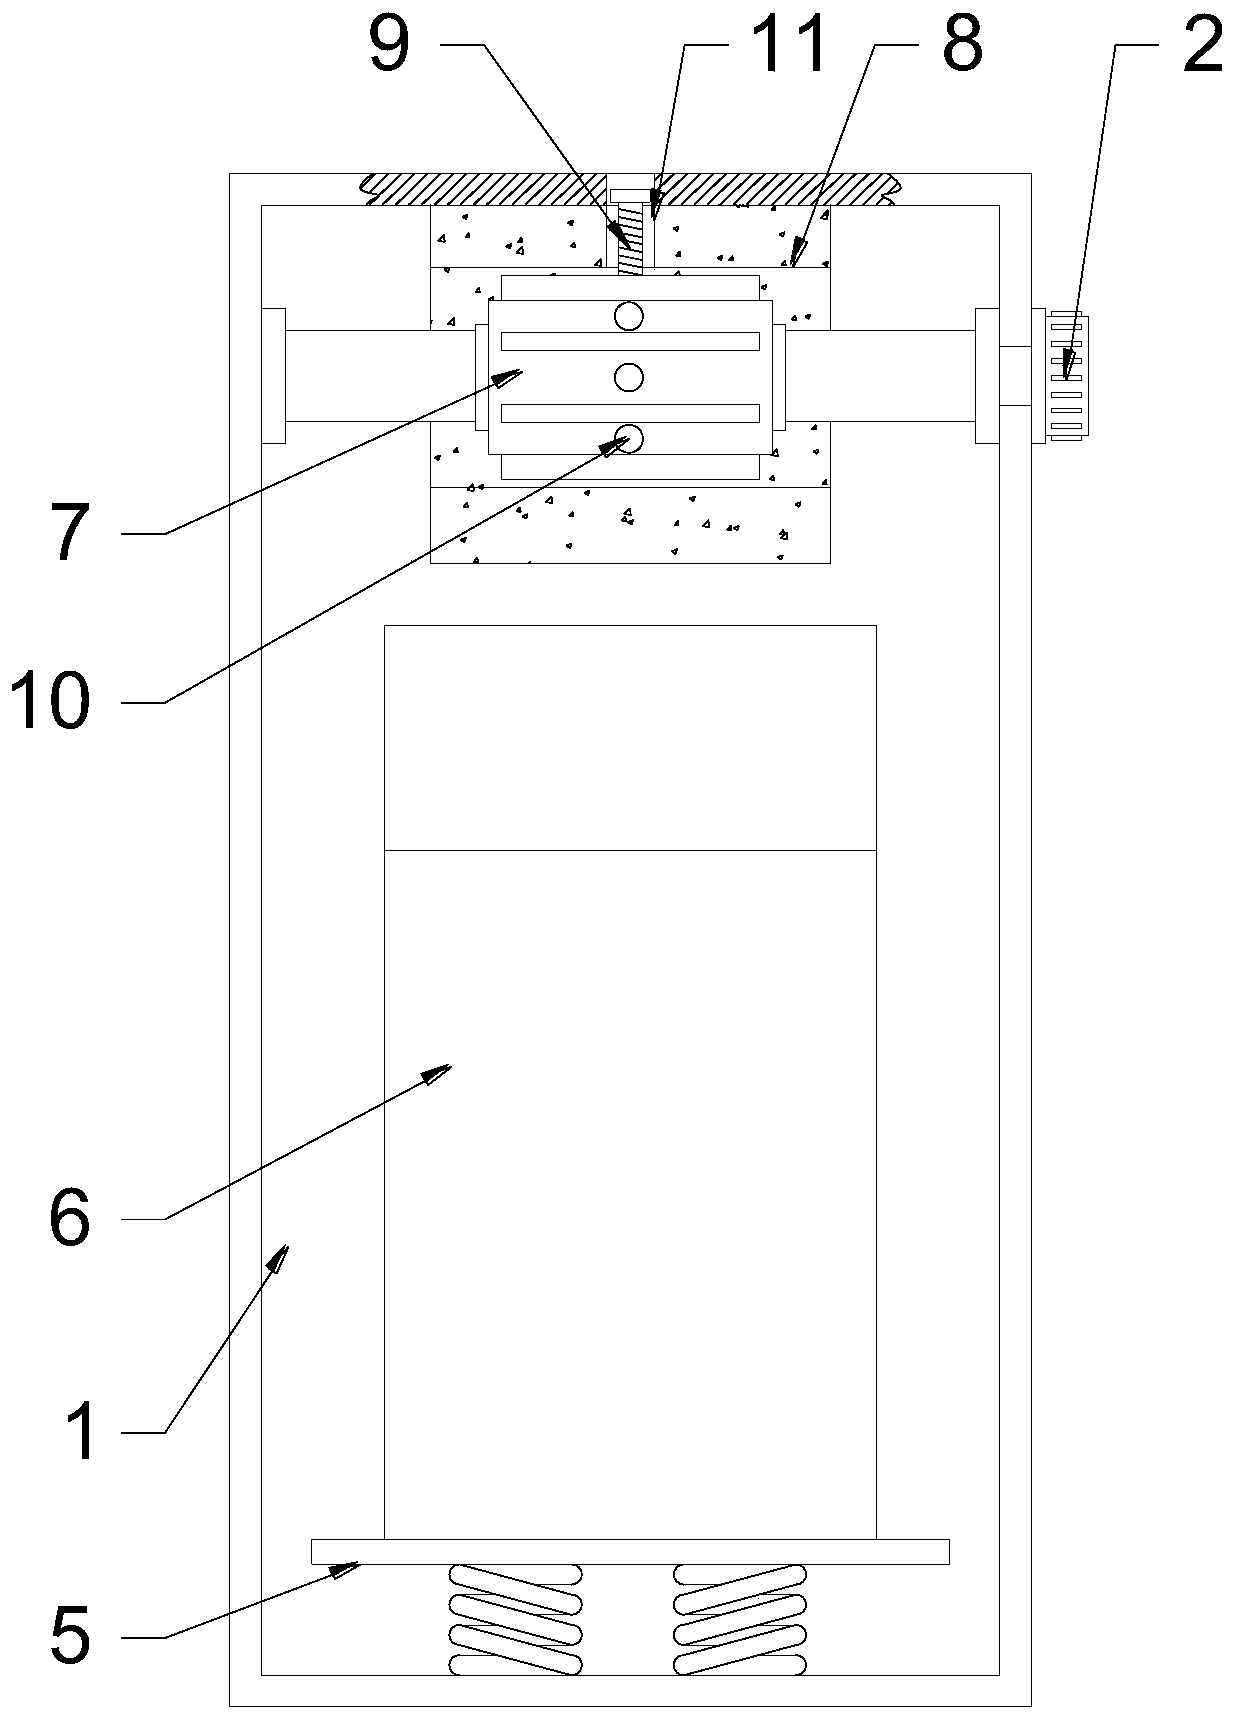 Transformer substation personnel positioning device for collecting spatio-temporal data